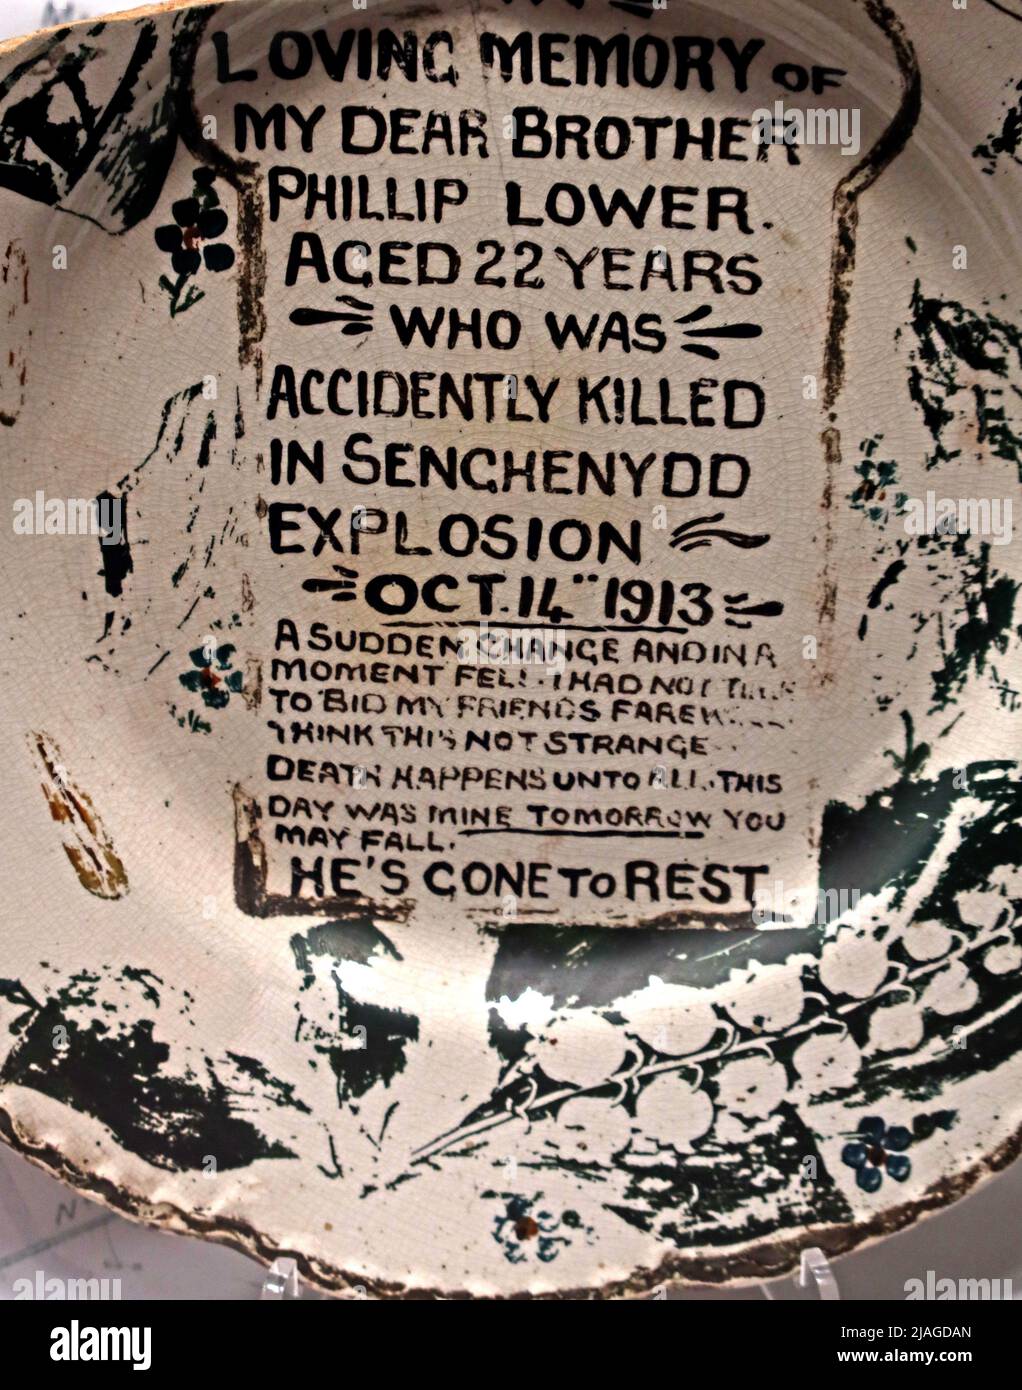 Memorial Plate, Phillip Lower, aged 22 years, who was accidently killed, in Senchenydd explosion, Oct 14th 1913 Stock Photo